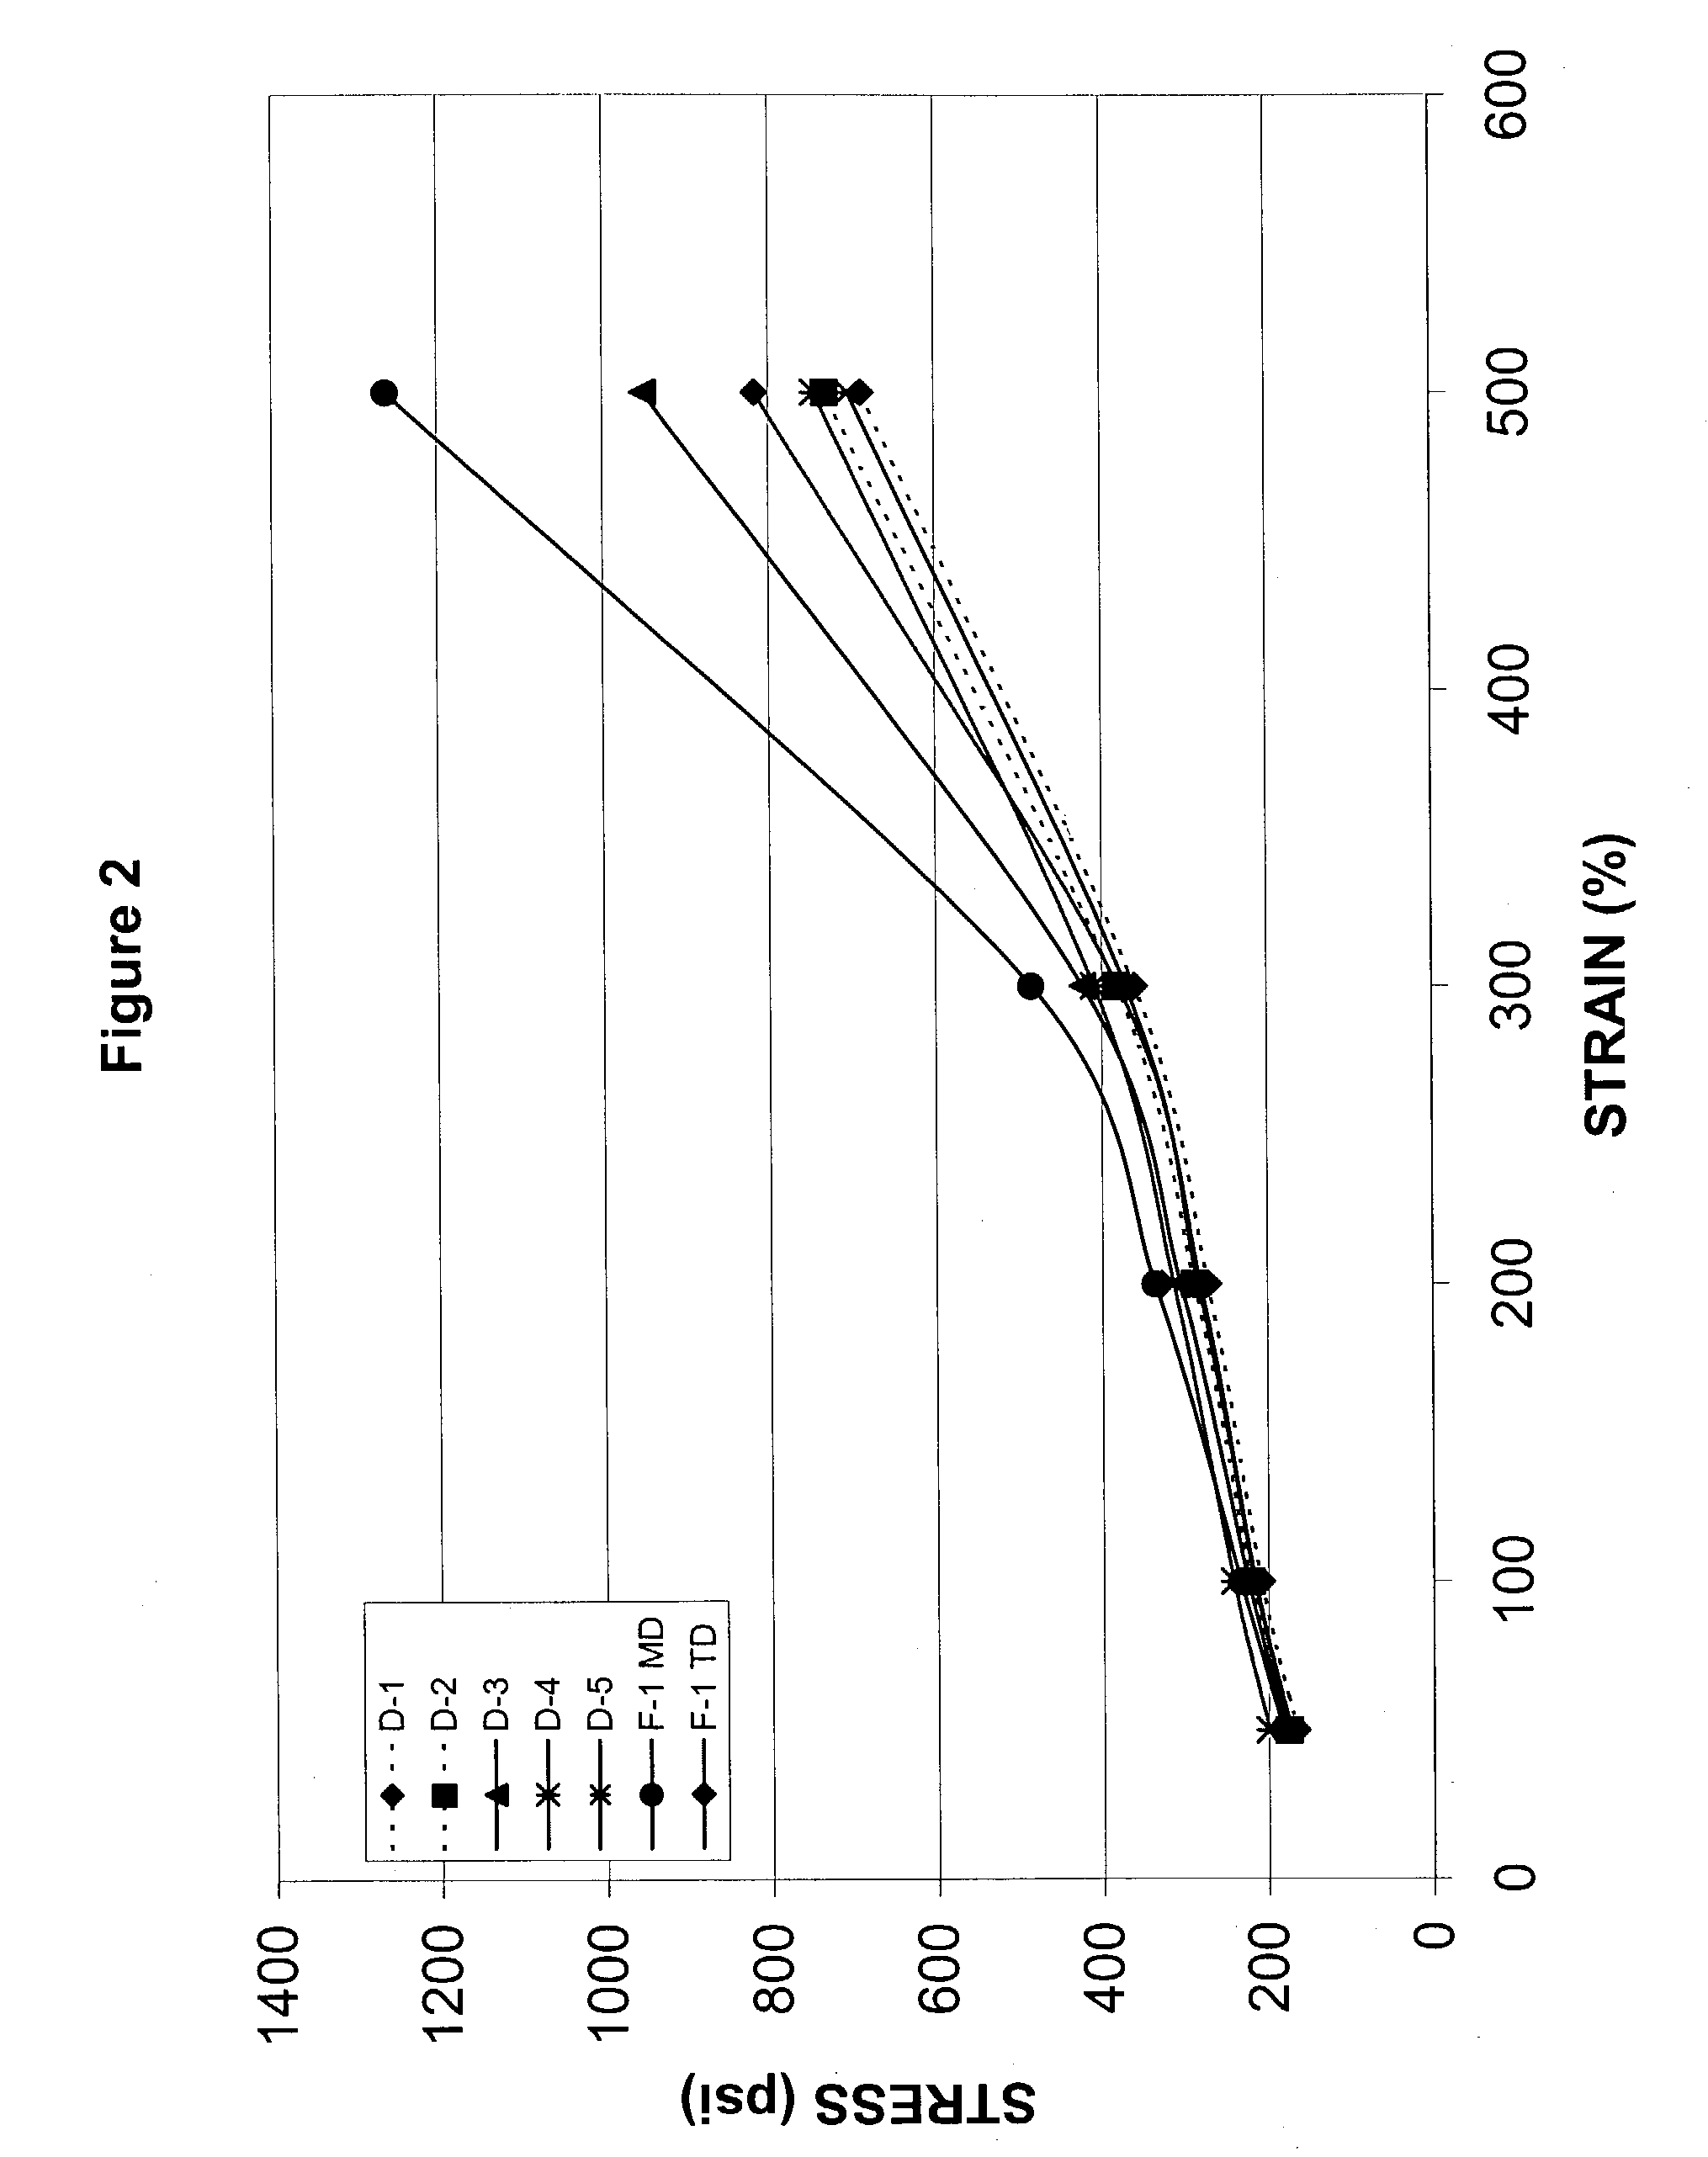 Tetrablock copolymer and compositions containing same